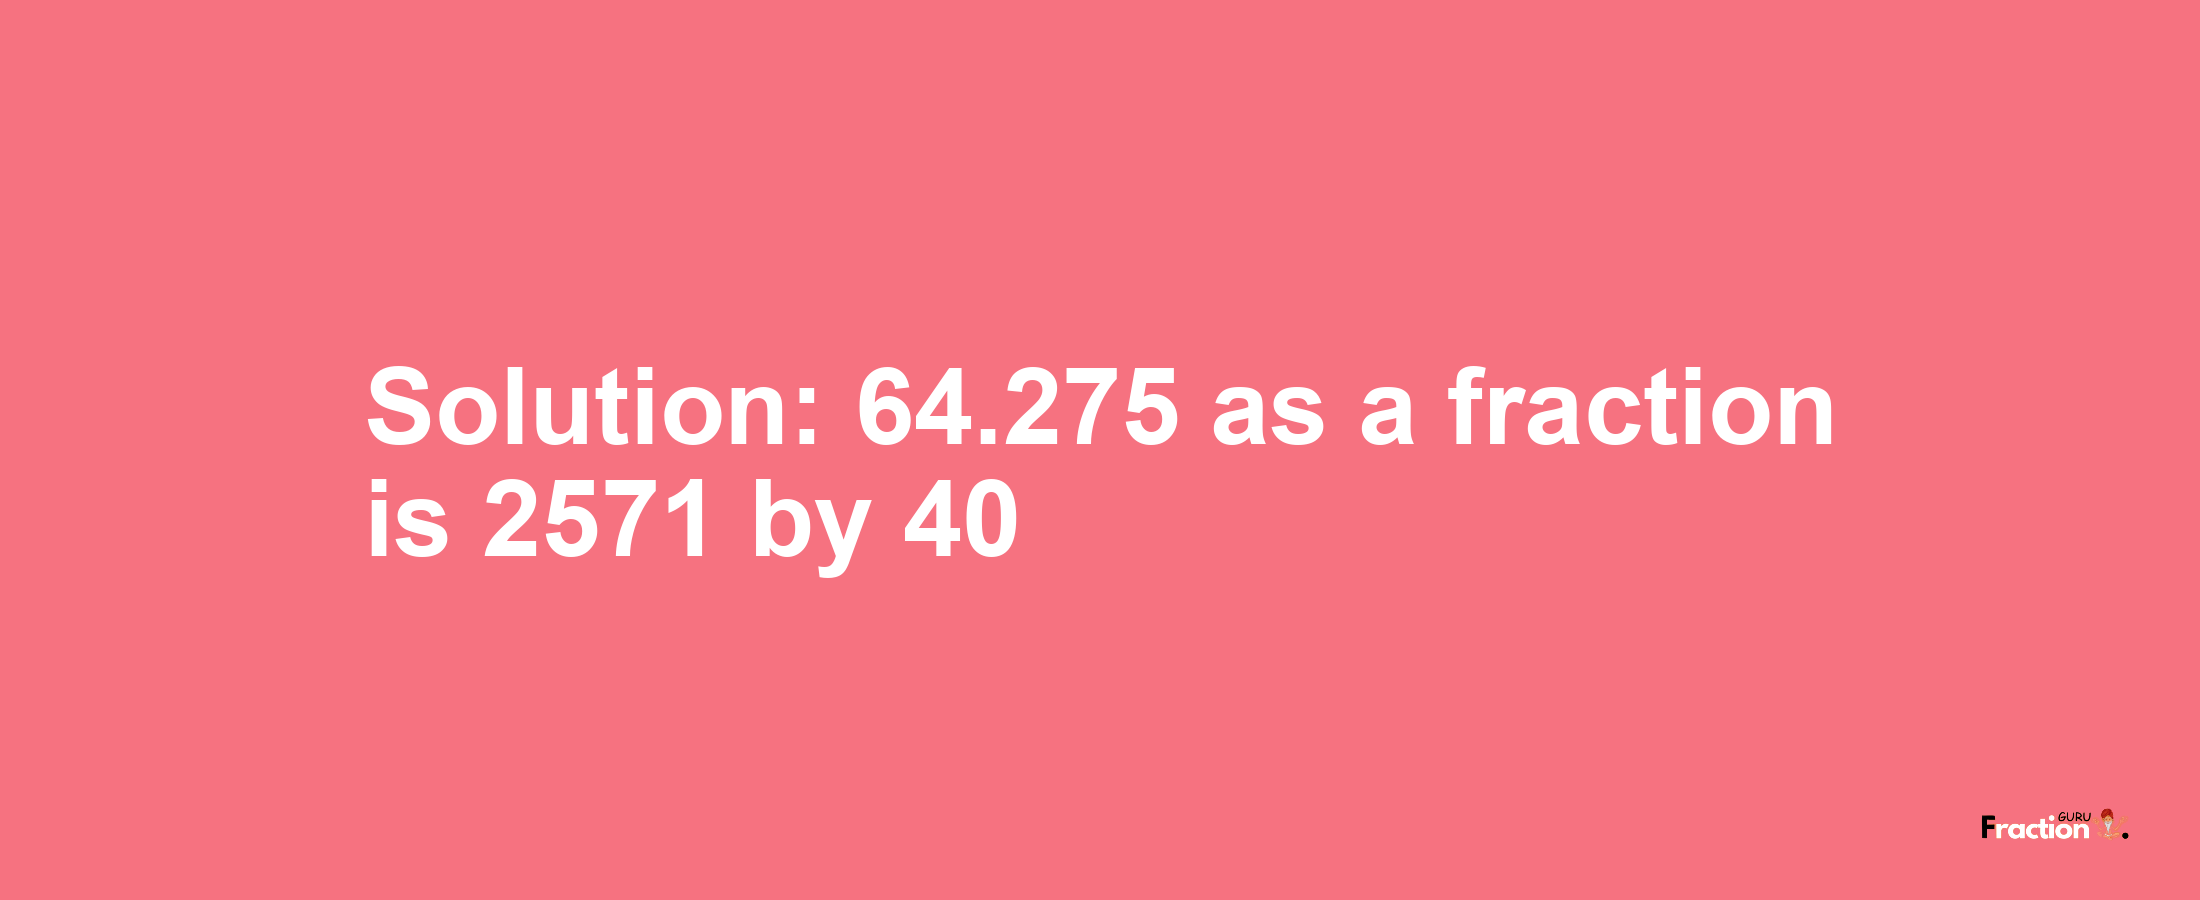 Solution:64.275 as a fraction is 2571/40